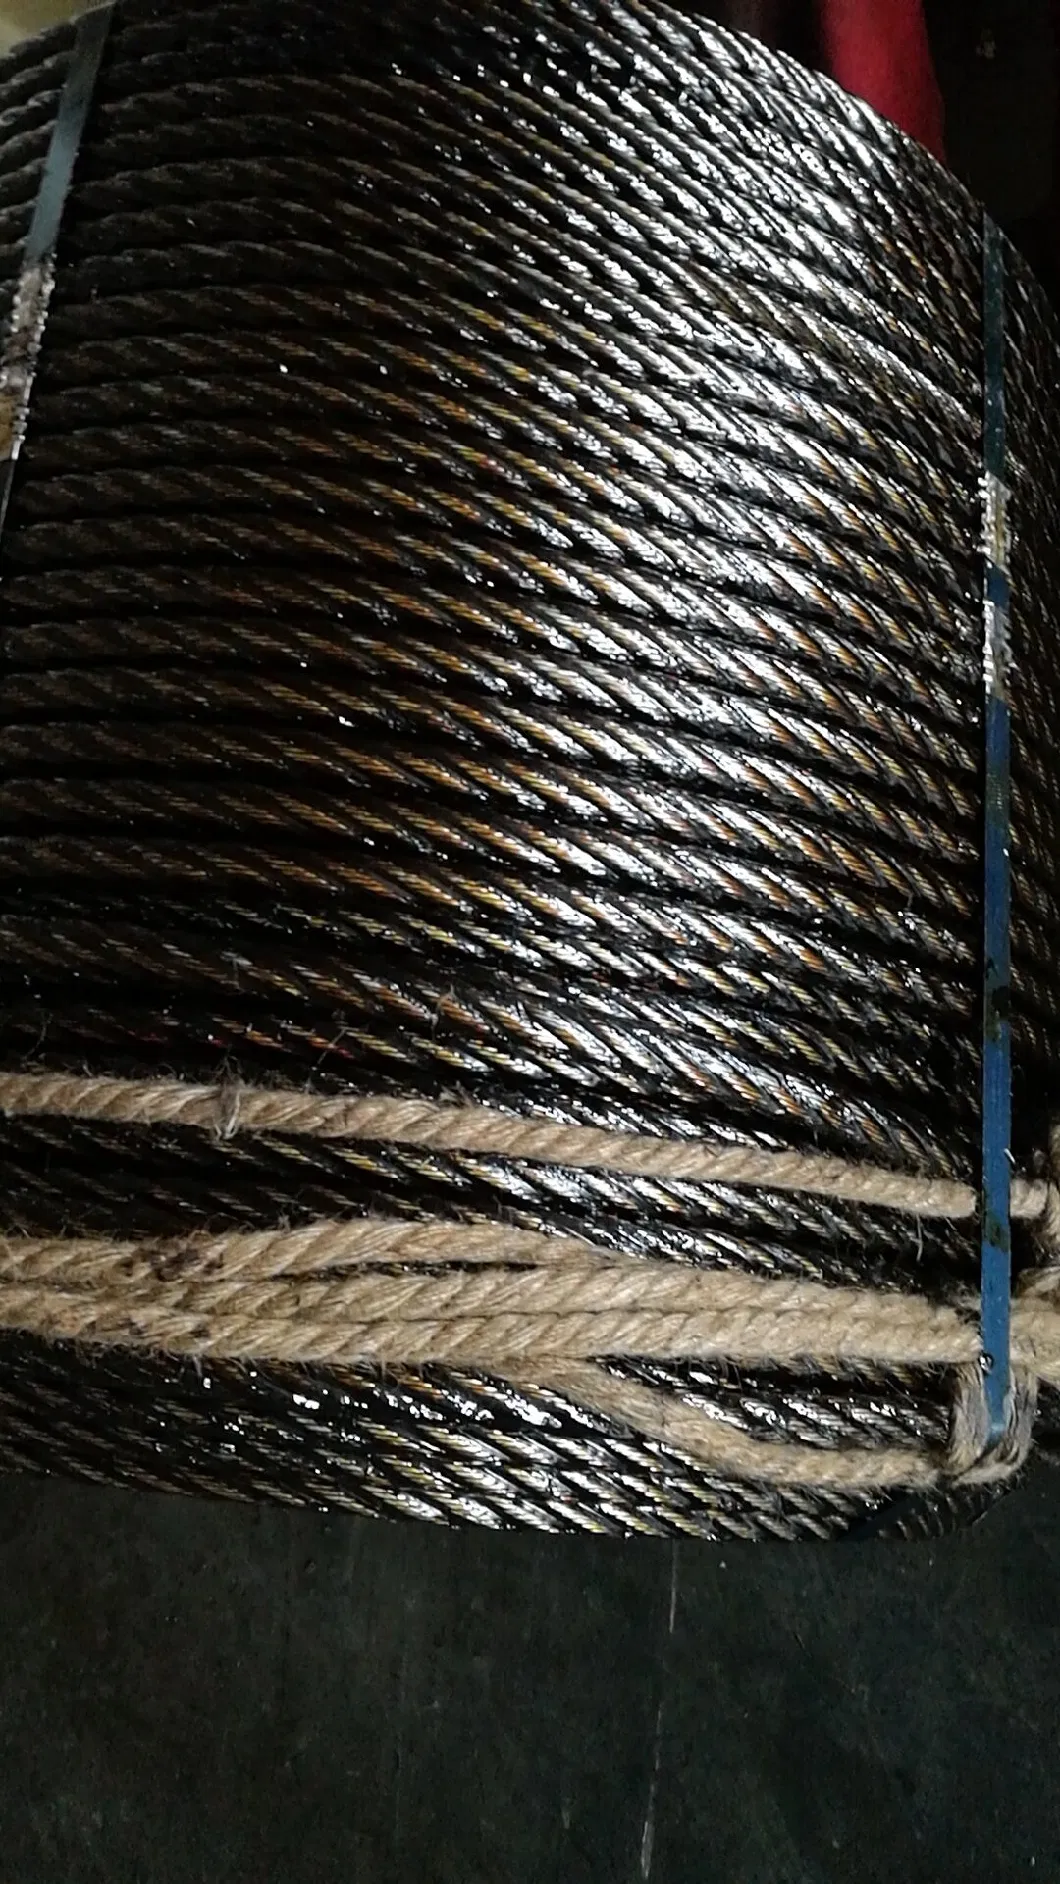 Compacted Steel Cable, Galvanized Wire Rope to Spain Huelva